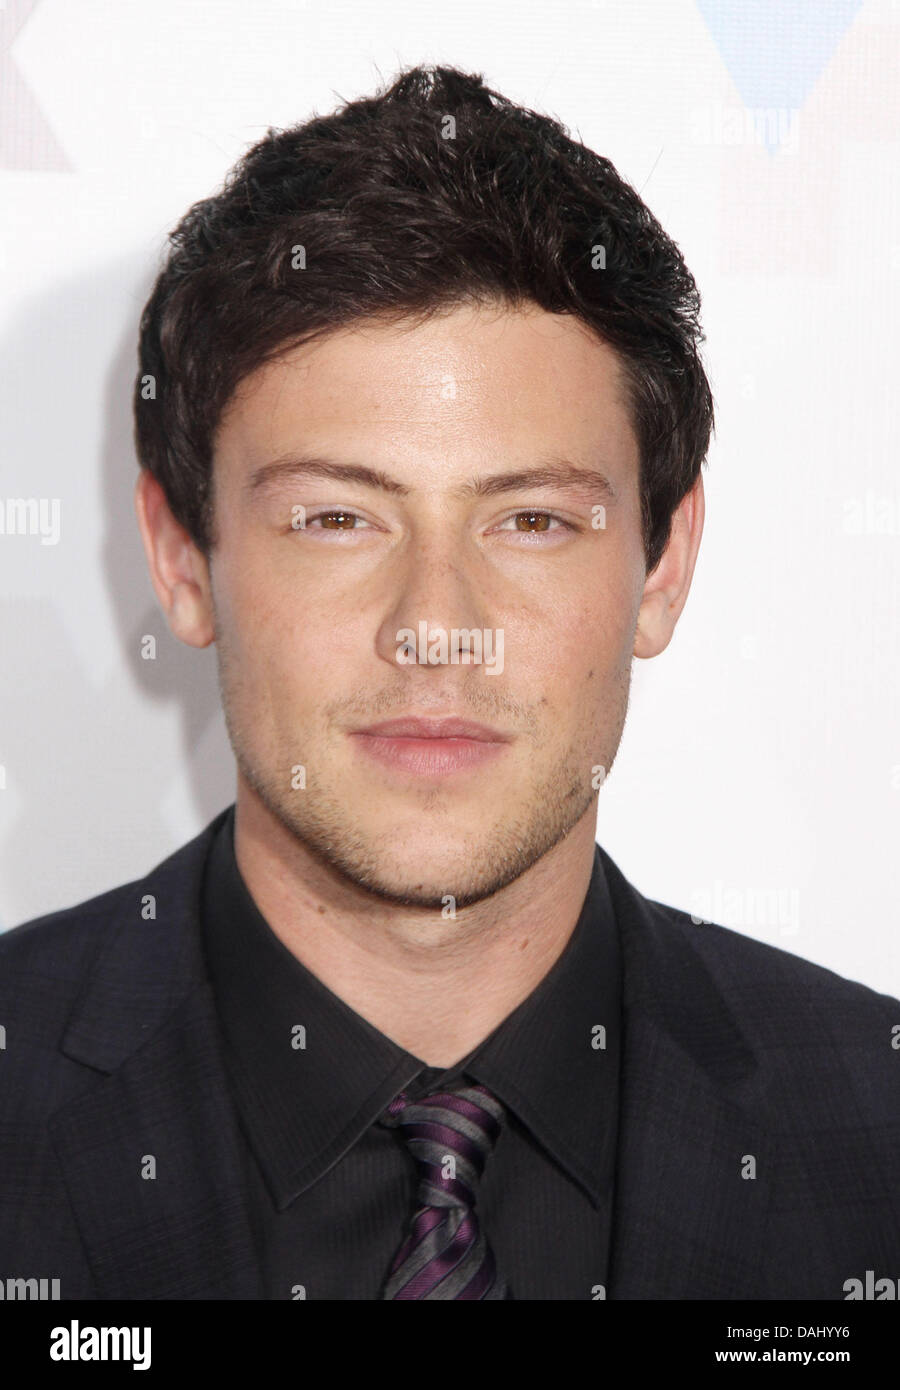 File Photo Cory Monteith Who Played Finn Hudson On The Hit Tv Show Glee Was Found Dead In